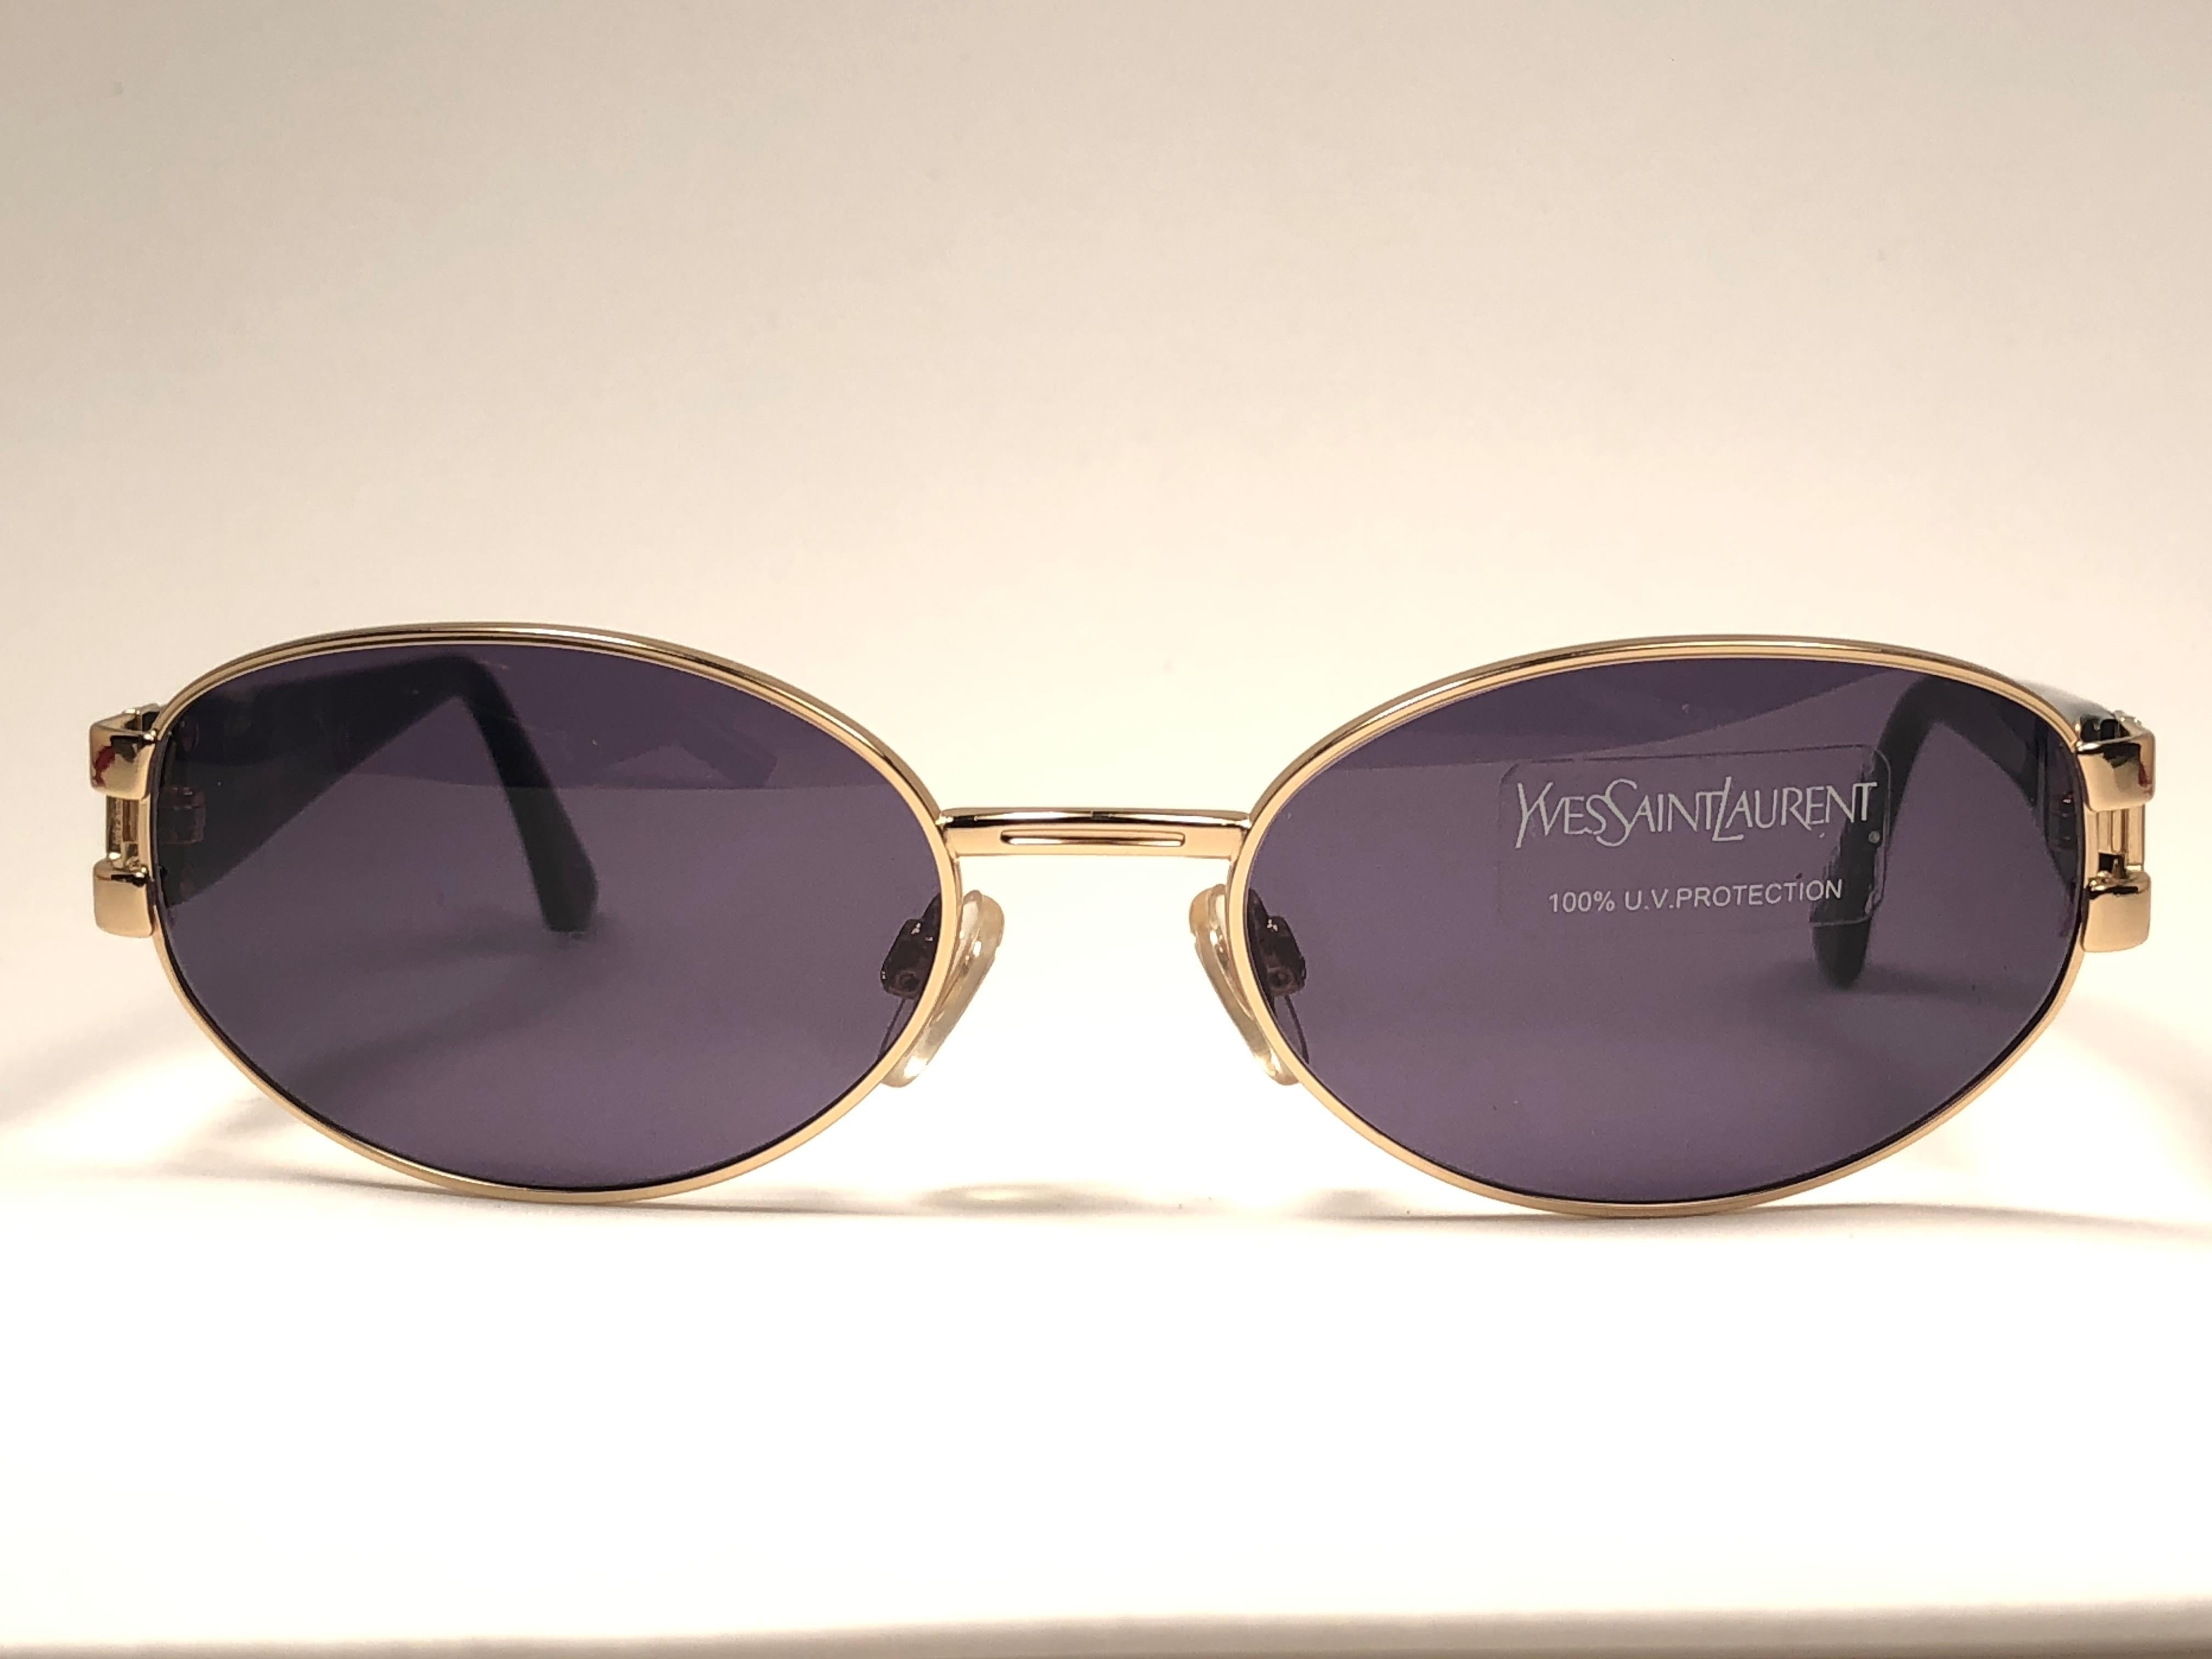 Super cool vintage Yves Saint Laurent 1980’s sunglasses. Oval gold shape framing a pair of solid brown lenses.


This pair is an style statement. The piece could show minor sign of wear due to storage.

A great opportunity to achieve a unique and